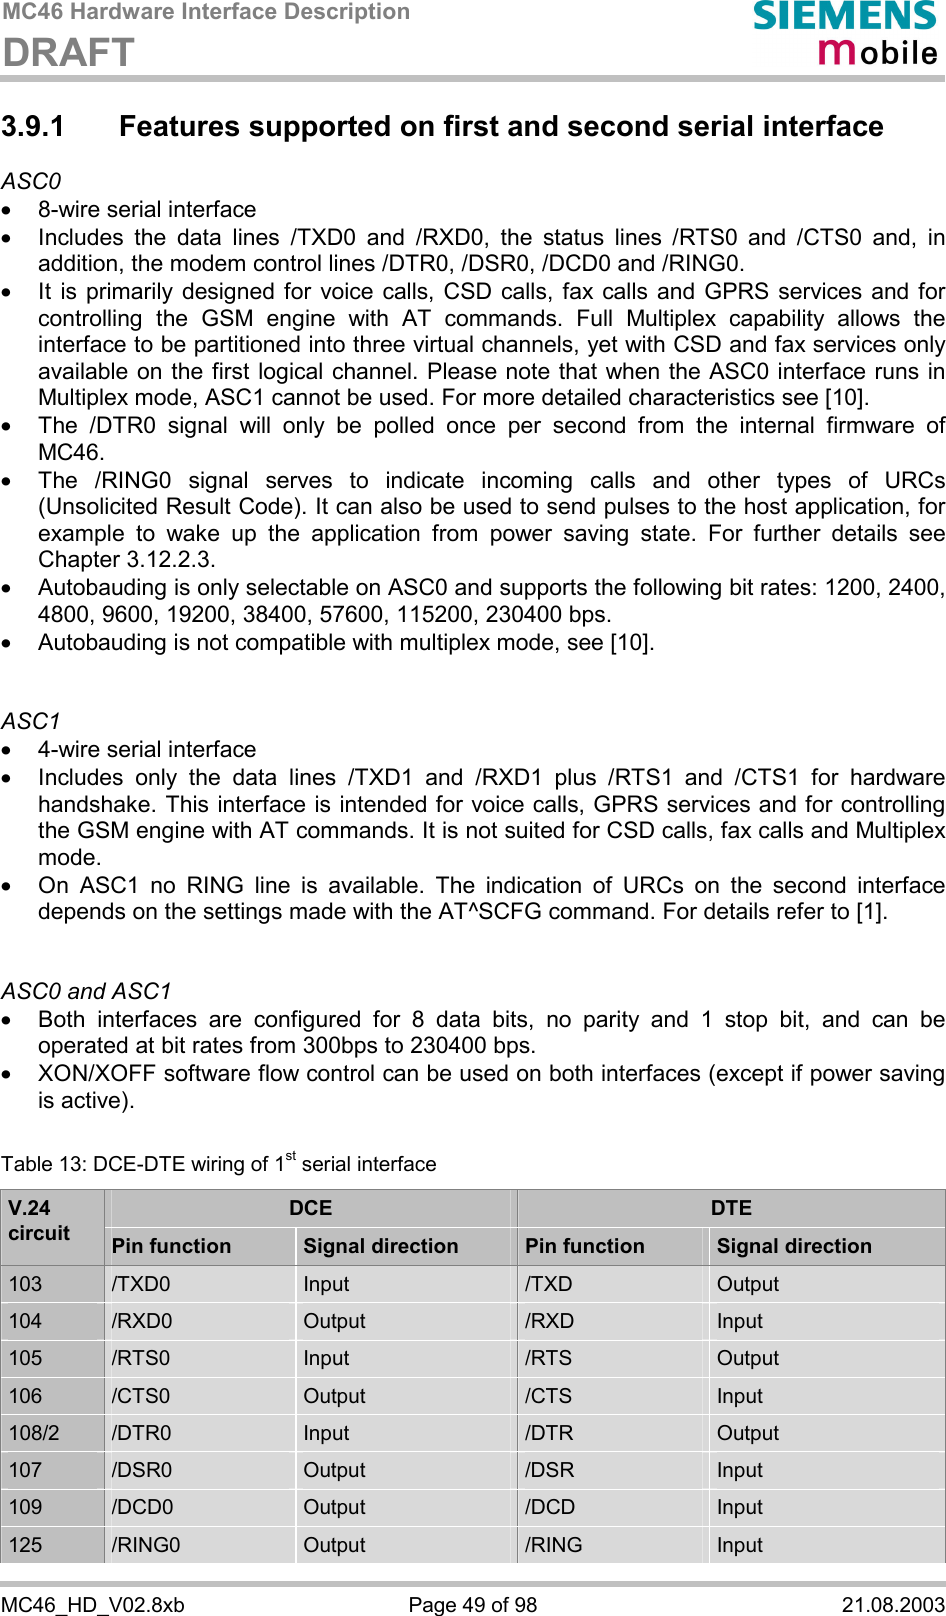 MC46 Hardware Interface Description DRAFT      MC46_HD_V02.8xb  Page 49 of 98  21.08.2003 3.9.1  Features supported on first and second serial interface ASC0 ·  8-wire serial interface ·  Includes the data lines /TXD0 and /RXD0, the status lines /RTS0 and /CTS0 and, in addition, the modem control lines /DTR0, /DSR0, /DCD0 and /RING0.  ·  It is primarily designed for voice calls, CSD calls, fax calls and GPRS services and for controlling the GSM engine with AT commands. Full Multiplex capability allows the interface to be partitioned into three virtual channels, yet with CSD and fax services only available on the first logical channel. Please note that when the ASC0 interface runs in Multiplex mode, ASC1 cannot be used. For more detailed characteristics see [10]. ·  The /DTR0 signal will only be polled once per second from the internal firmware of MC46.  ·  The /RING0 signal serves to indicate incoming calls and other types of URCs (Unsolicited Result Code). It can also be used to send pulses to the host application, for example to wake up the application from power saving state. For further details see Chapter 3.12.2.3. ·  Autobauding is only selectable on ASC0 and supports the following bit rates: 1200, 2400, 4800, 9600, 19200, 38400, 57600, 115200, 230400 bps.  ·  Autobauding is not compatible with multiplex mode, see [10].   ASC1 ·  4-wire serial interface ·  Includes only the data lines /TXD1 and /RXD1 plus /RTS1 and /CTS1 for hardware handshake. This interface is intended for voice calls, GPRS services and for controlling the GSM engine with AT commands. It is not suited for CSD calls, fax calls and Multiplex mode.  ·  On ASC1 no RING line is available. The indication of URCs on the second interface depends on the settings made with the AT^SCFG command. For details refer to [1].   ASC0 and ASC1 ·  Both interfaces are configured for 8 data bits, no parity and 1 stop bit, and can be operated at bit rates from 300bps to 230400 bps.  ·  XON/XOFF software flow control can be used on both interfaces (except if power saving is active).  Table 13: DCE-DTE wiring of 1st serial interface DCE  DTE V.24 circuit  Pin function  Signal direction  Pin function  Signal direction 103  /TXD0  Input  /TXD  Output 104  /RXD0  Output  /RXD  Input 105  /RTS0  Input  /RTS  Output 106  /CTS0  Output  /CTS  Input 108/2  /DTR0  Input  /DTR  Output 107  /DSR0  Output  /DSR  Input 109  /DCD0  Output  /DCD  Input 125  /RING0  Output  /RING  Input 